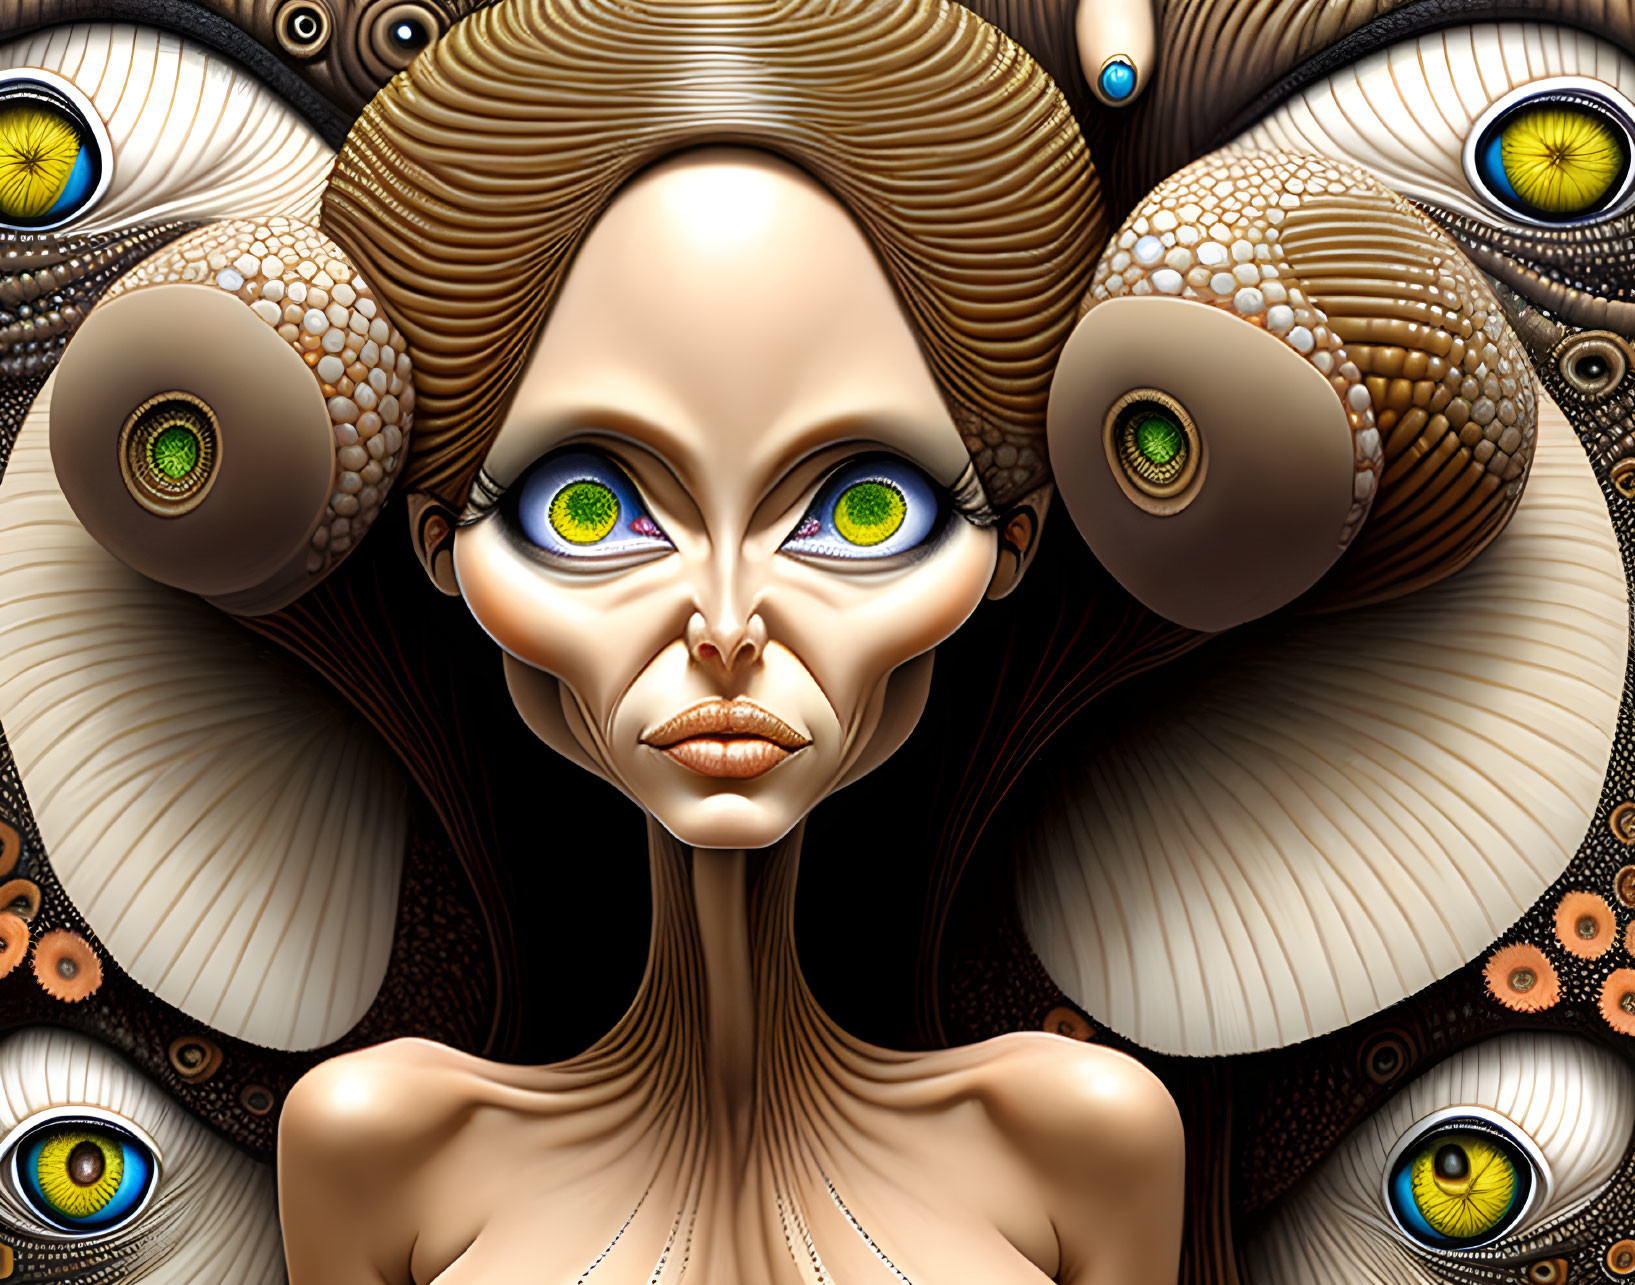 Exaggerated eyes in surreal portrait with eye-like patterns